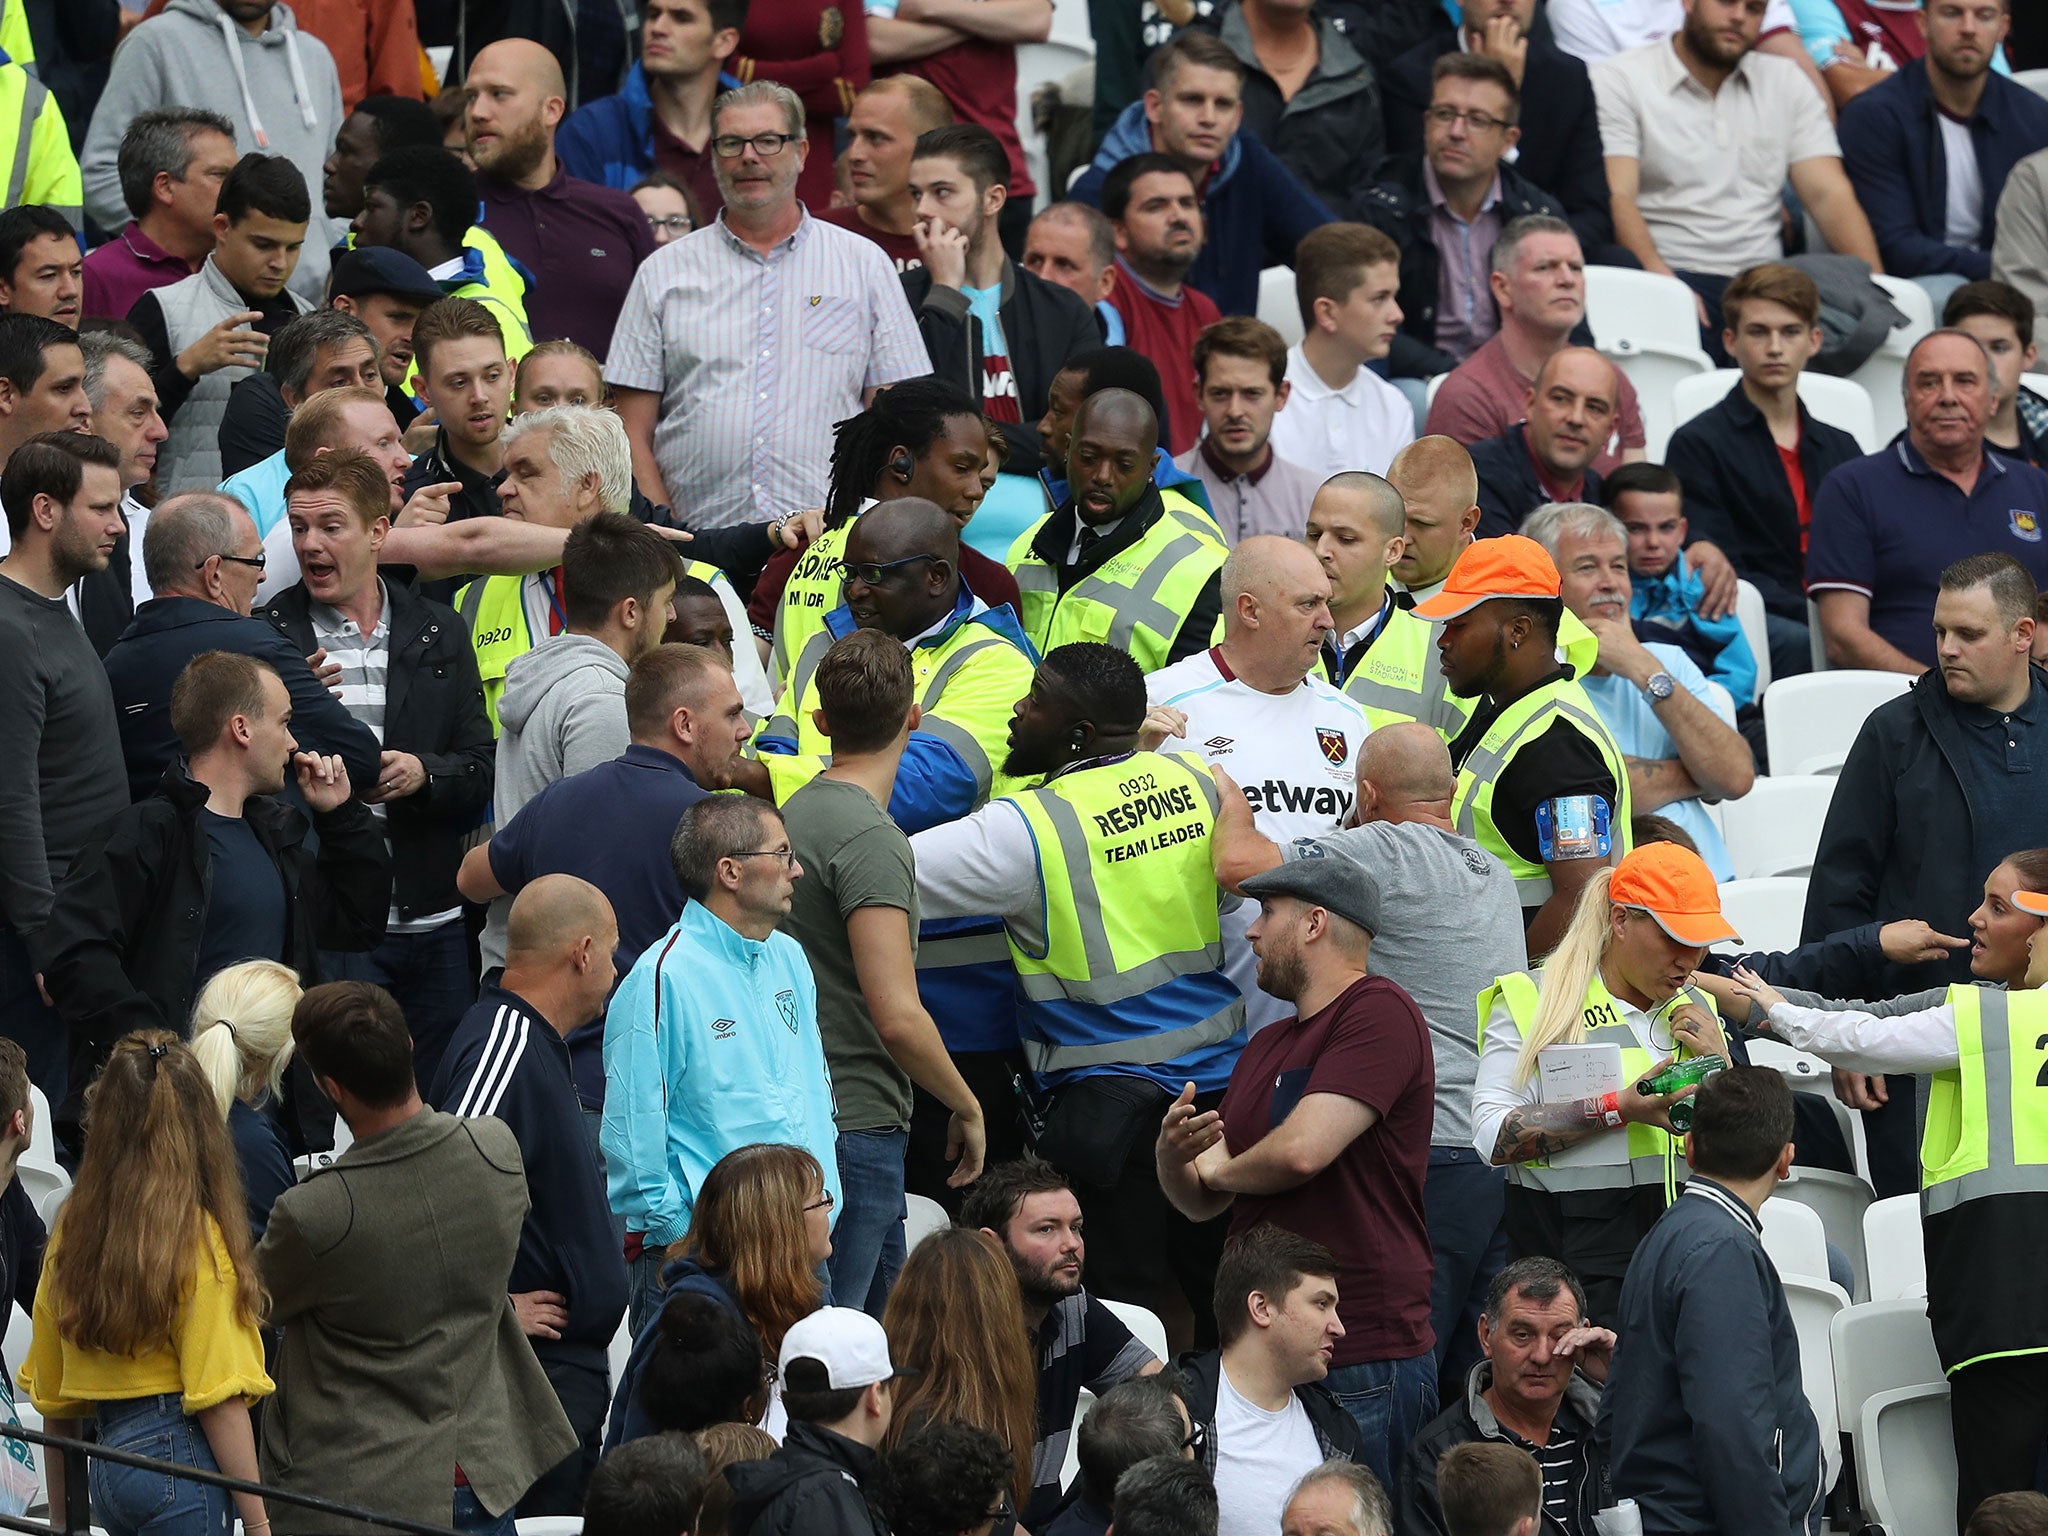 Home fans clash in the London Stadium